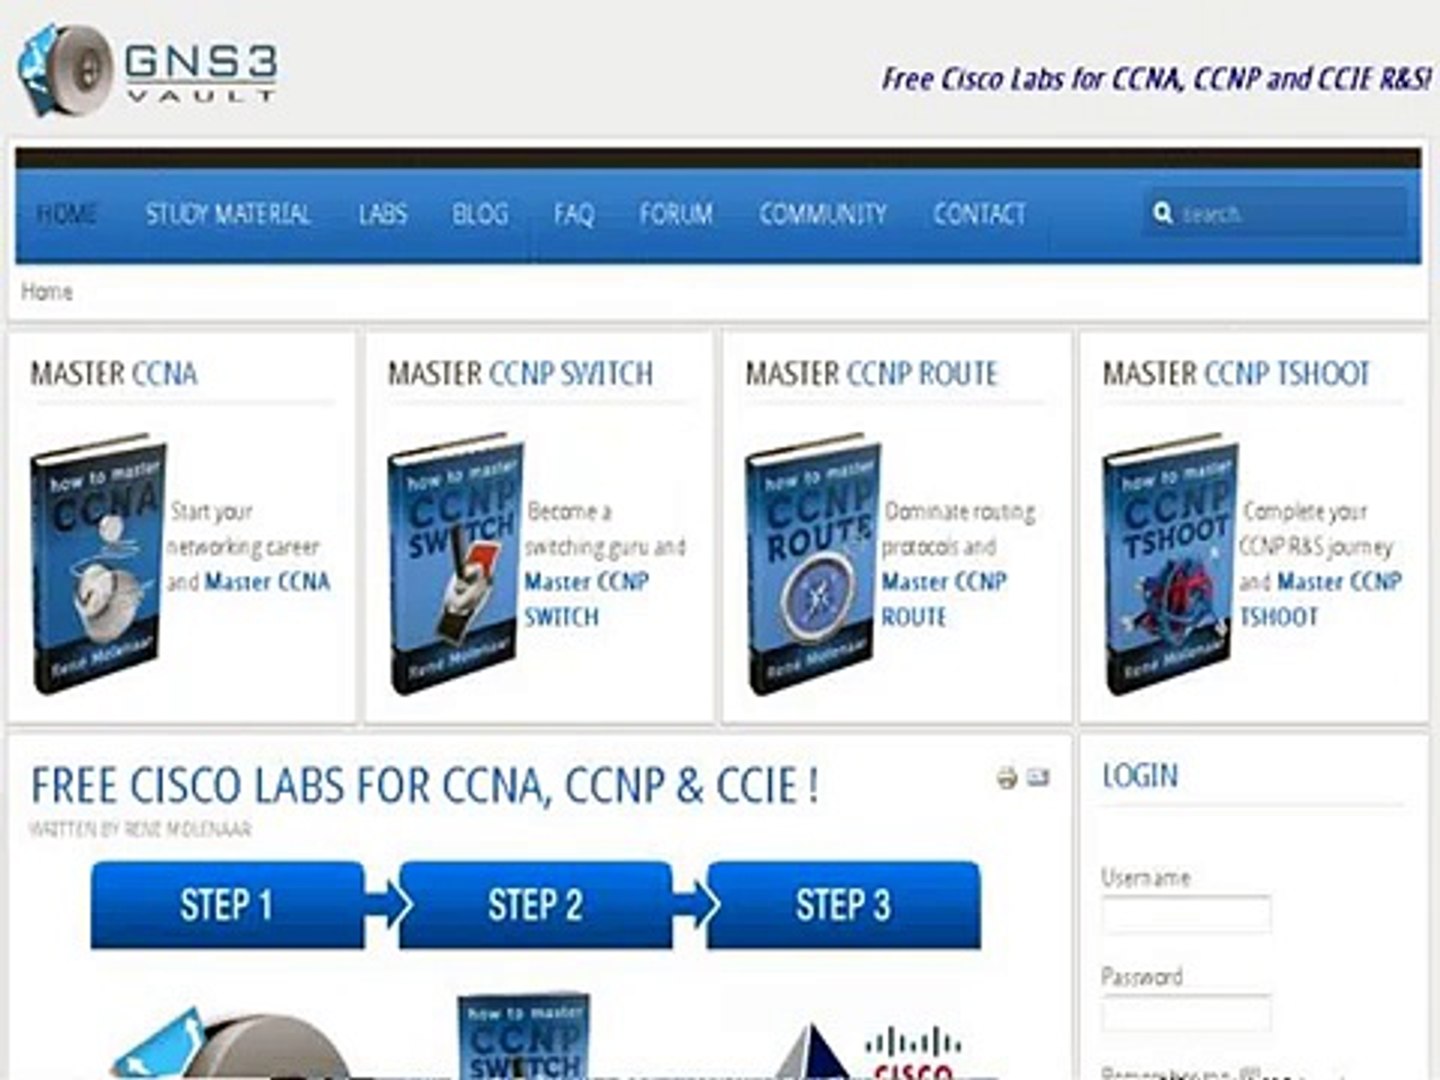 Gns3vault Study Material For Cisco Ccna Ccnp And Ccie Students Download Video Dailymotion